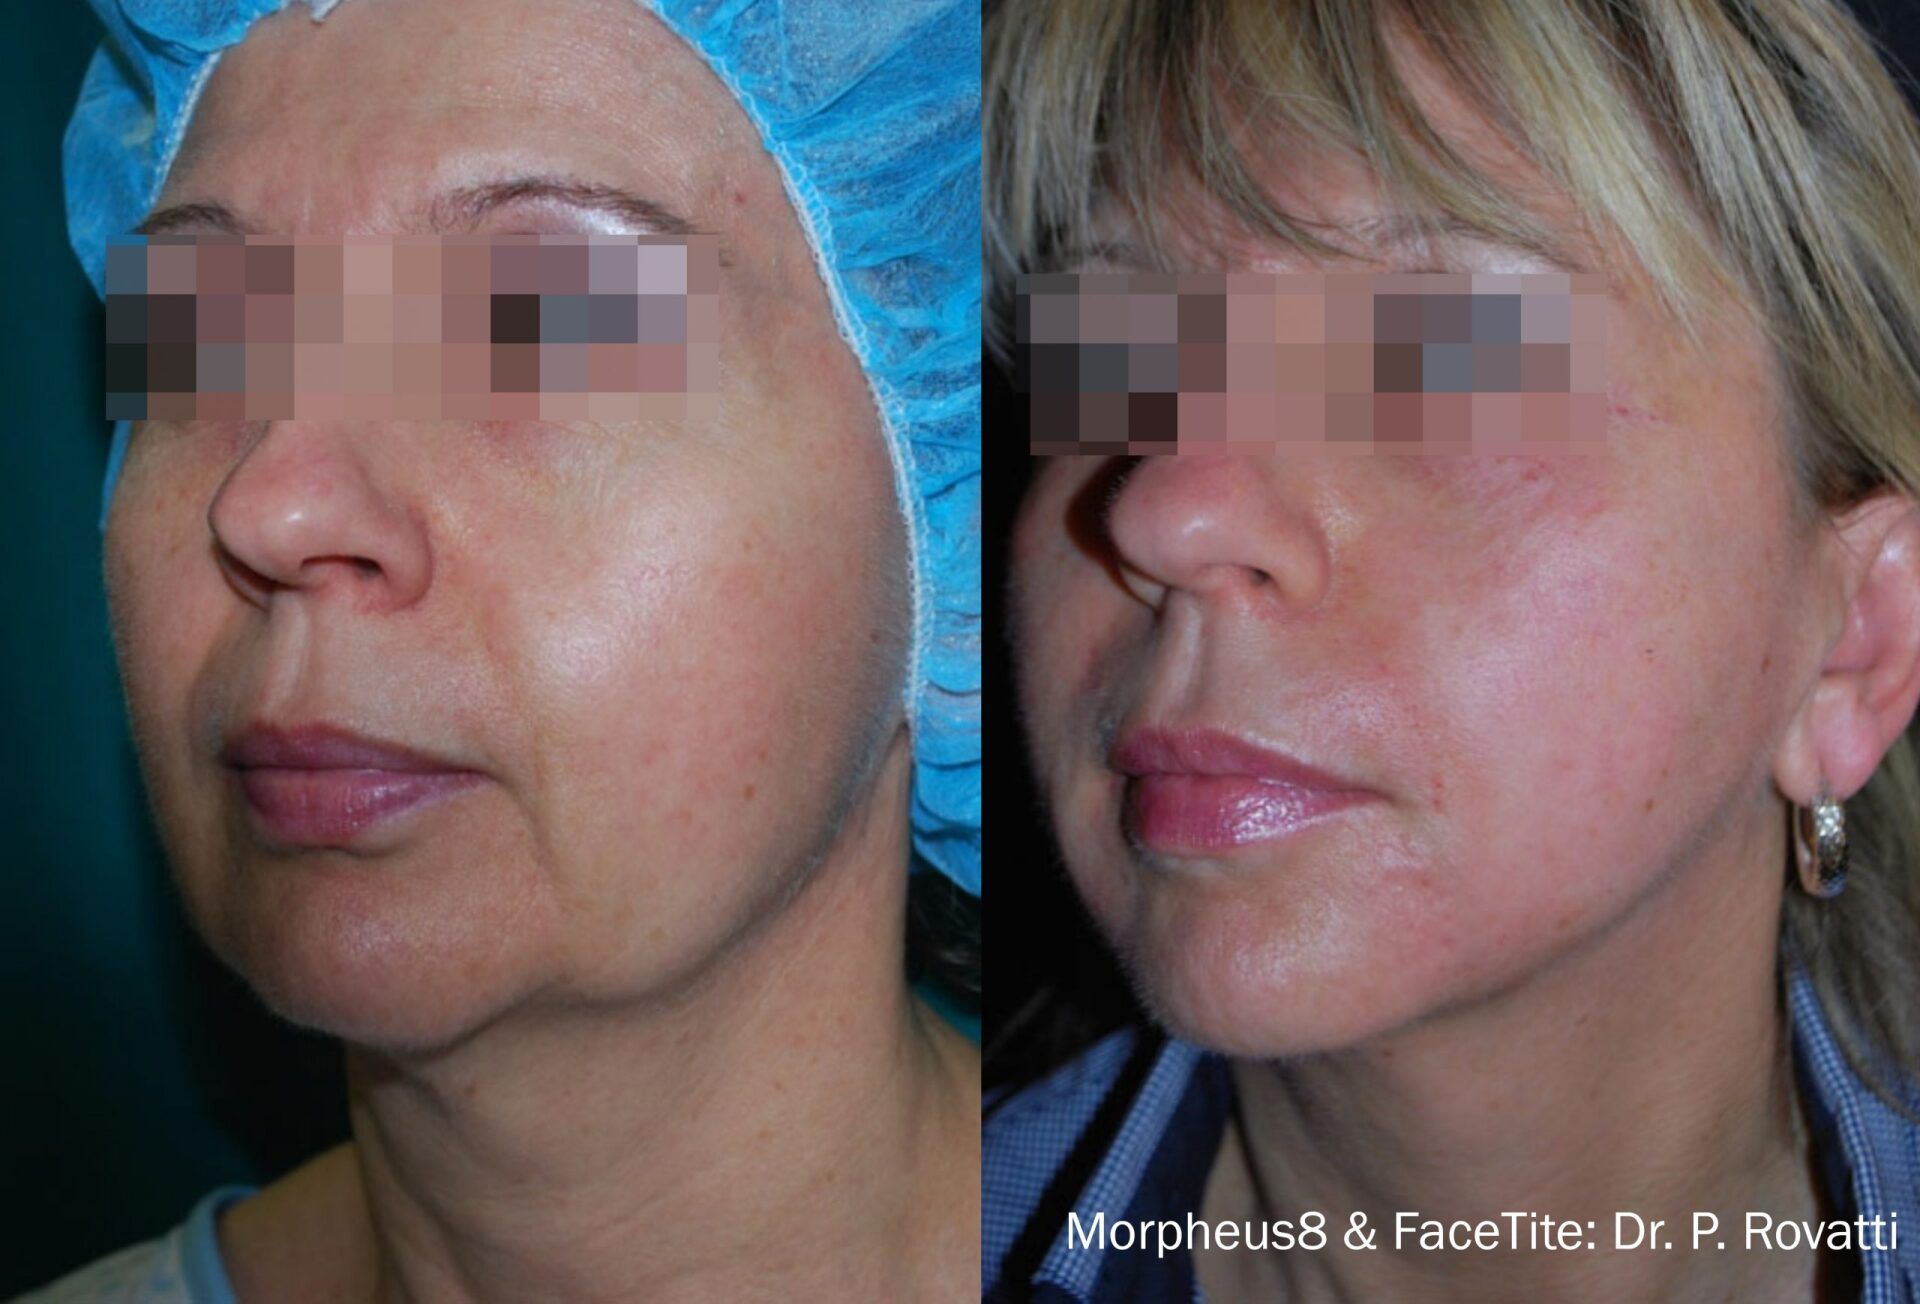 Before and After Morpheus8 Treatment, with FaceTite